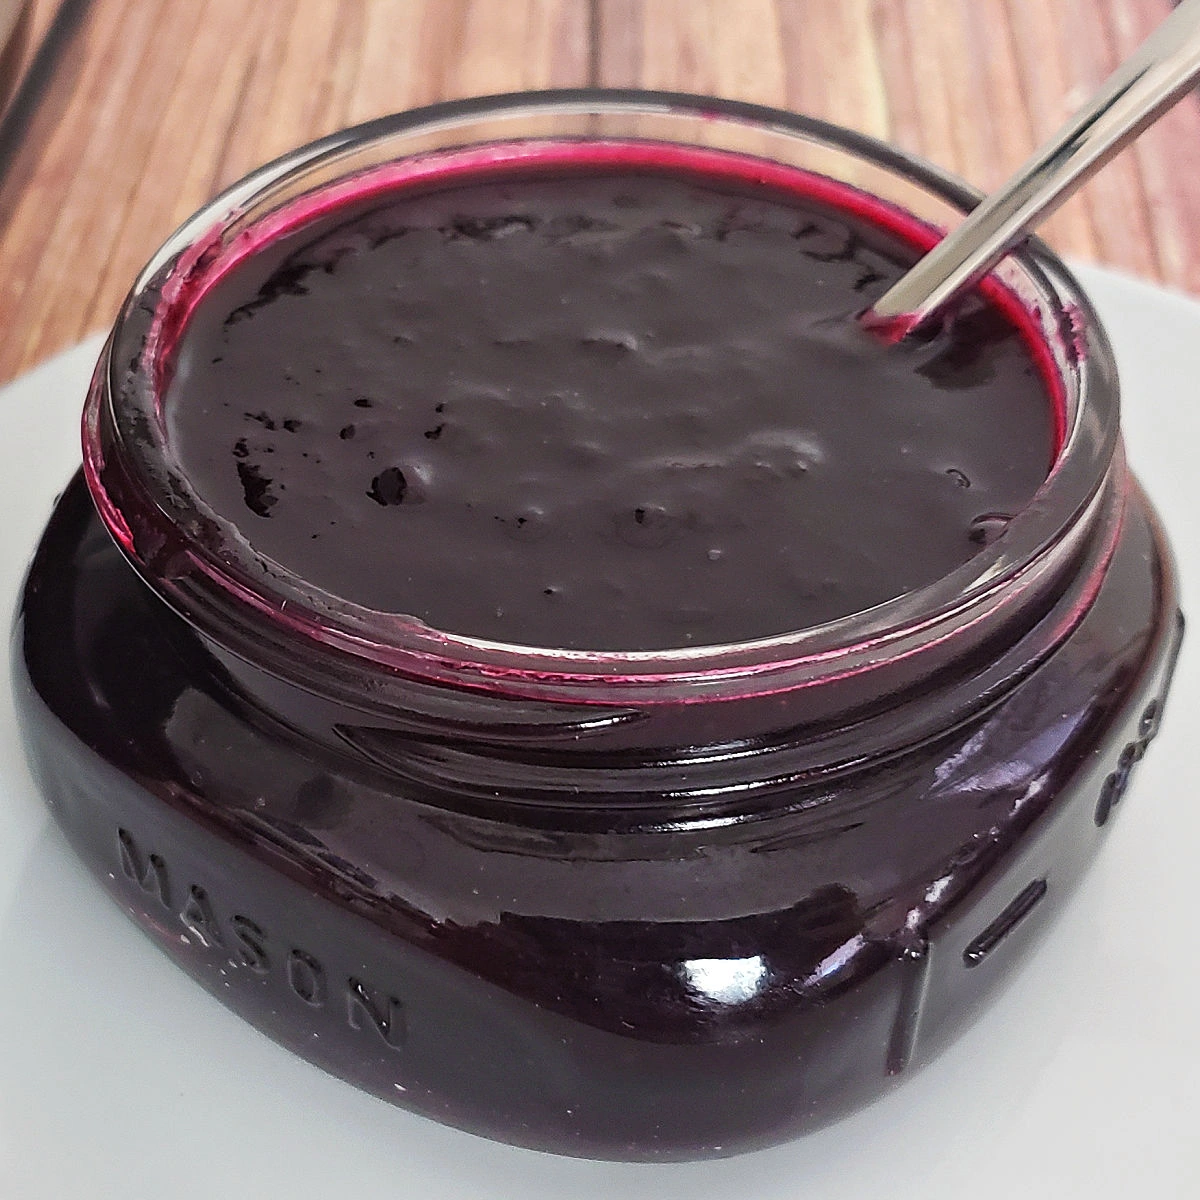 Half pint jar of homemade Instant Pot blueberry jam with spoon.